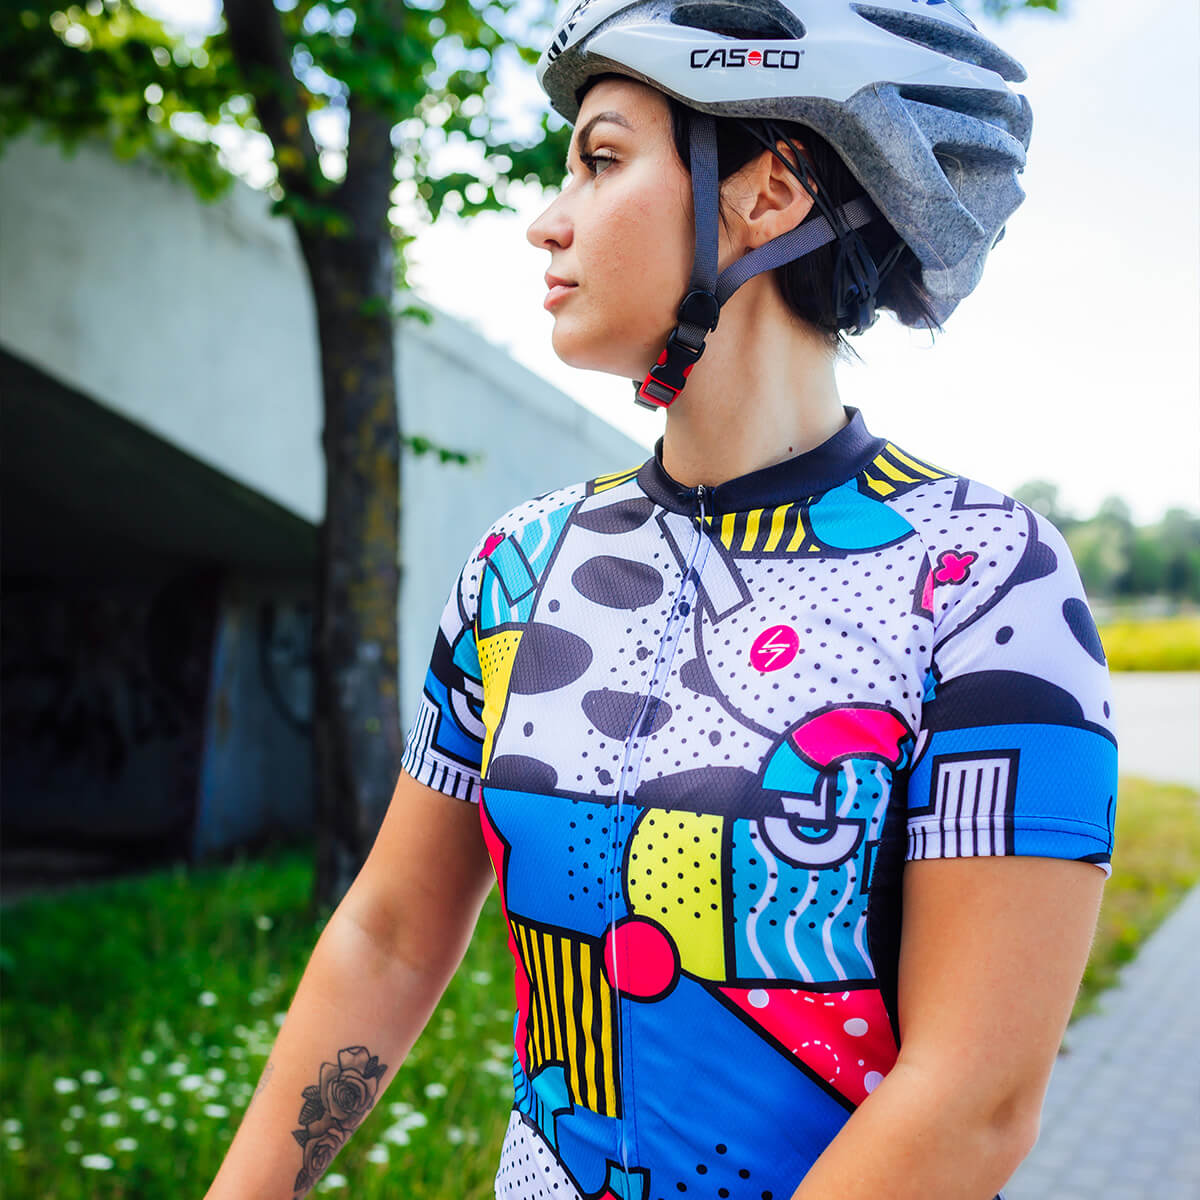 STEEP Cycling: Shop Best Cycling Kits of 2023